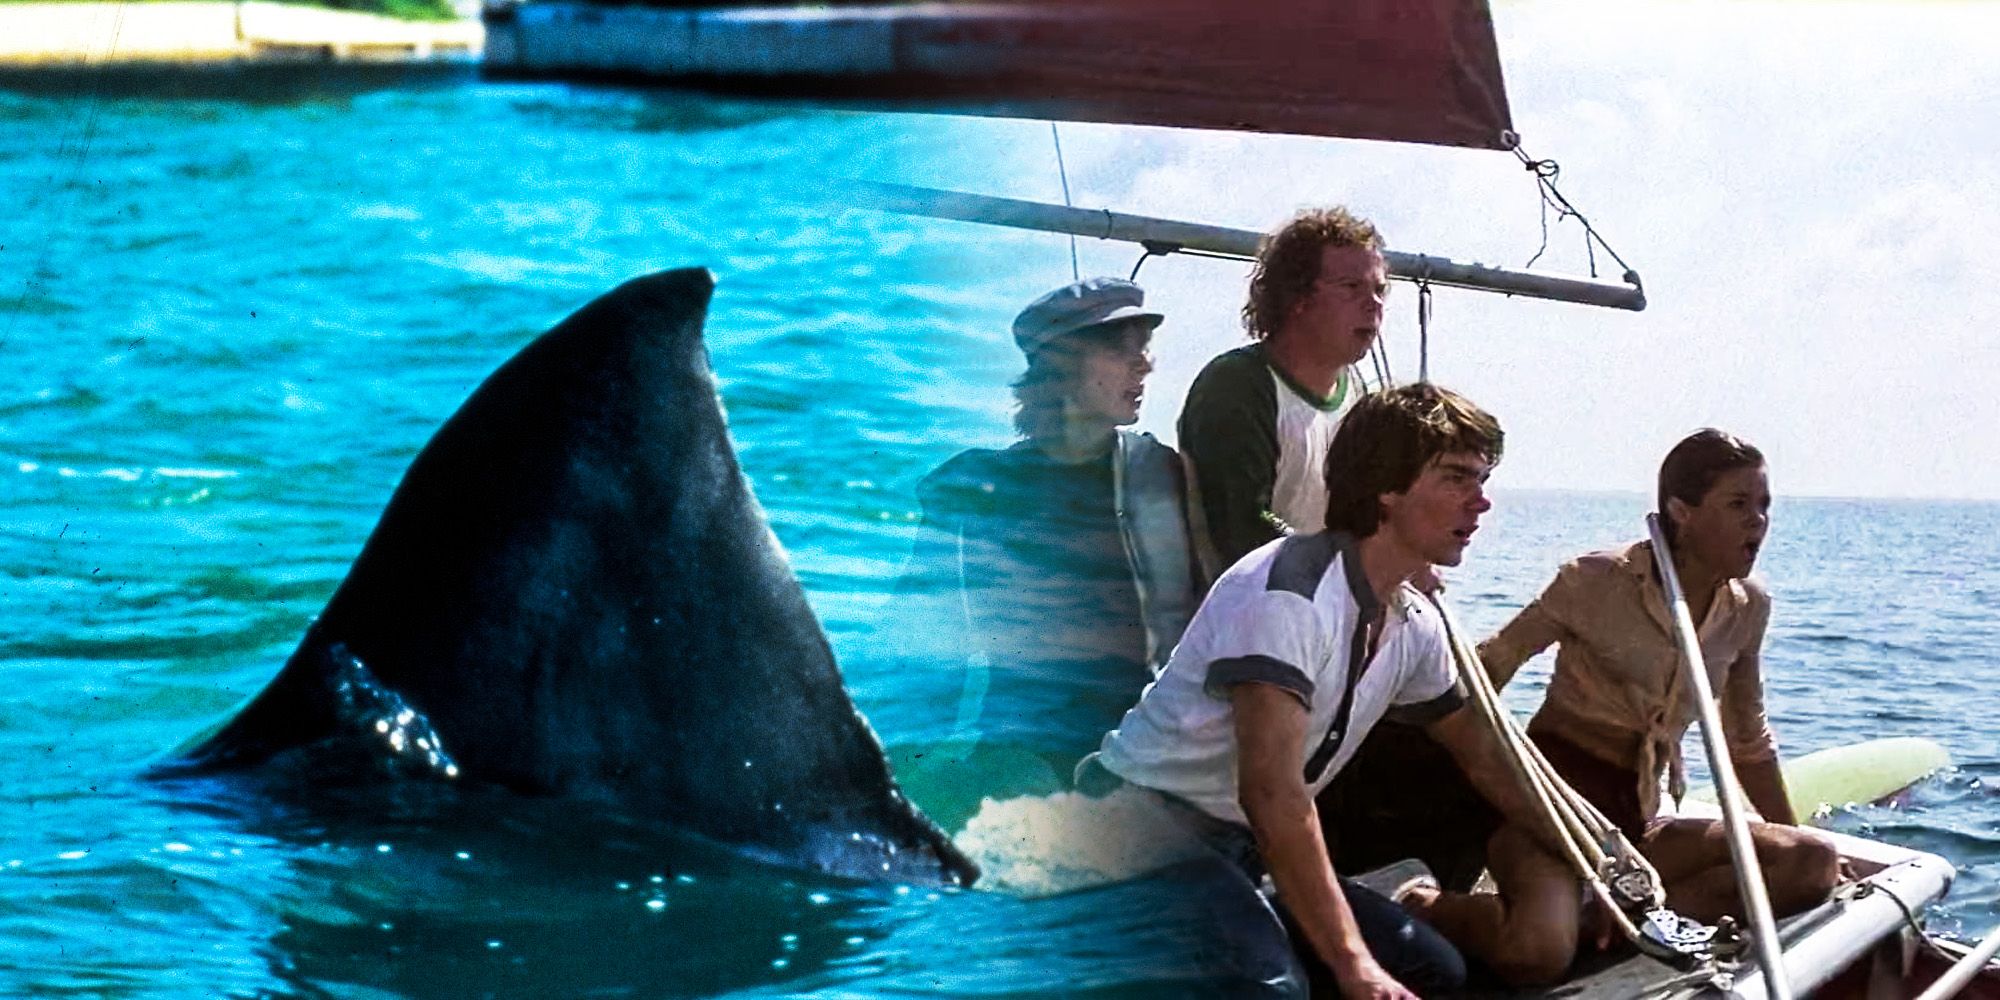 Jaws 2 cast stalked by real sharks